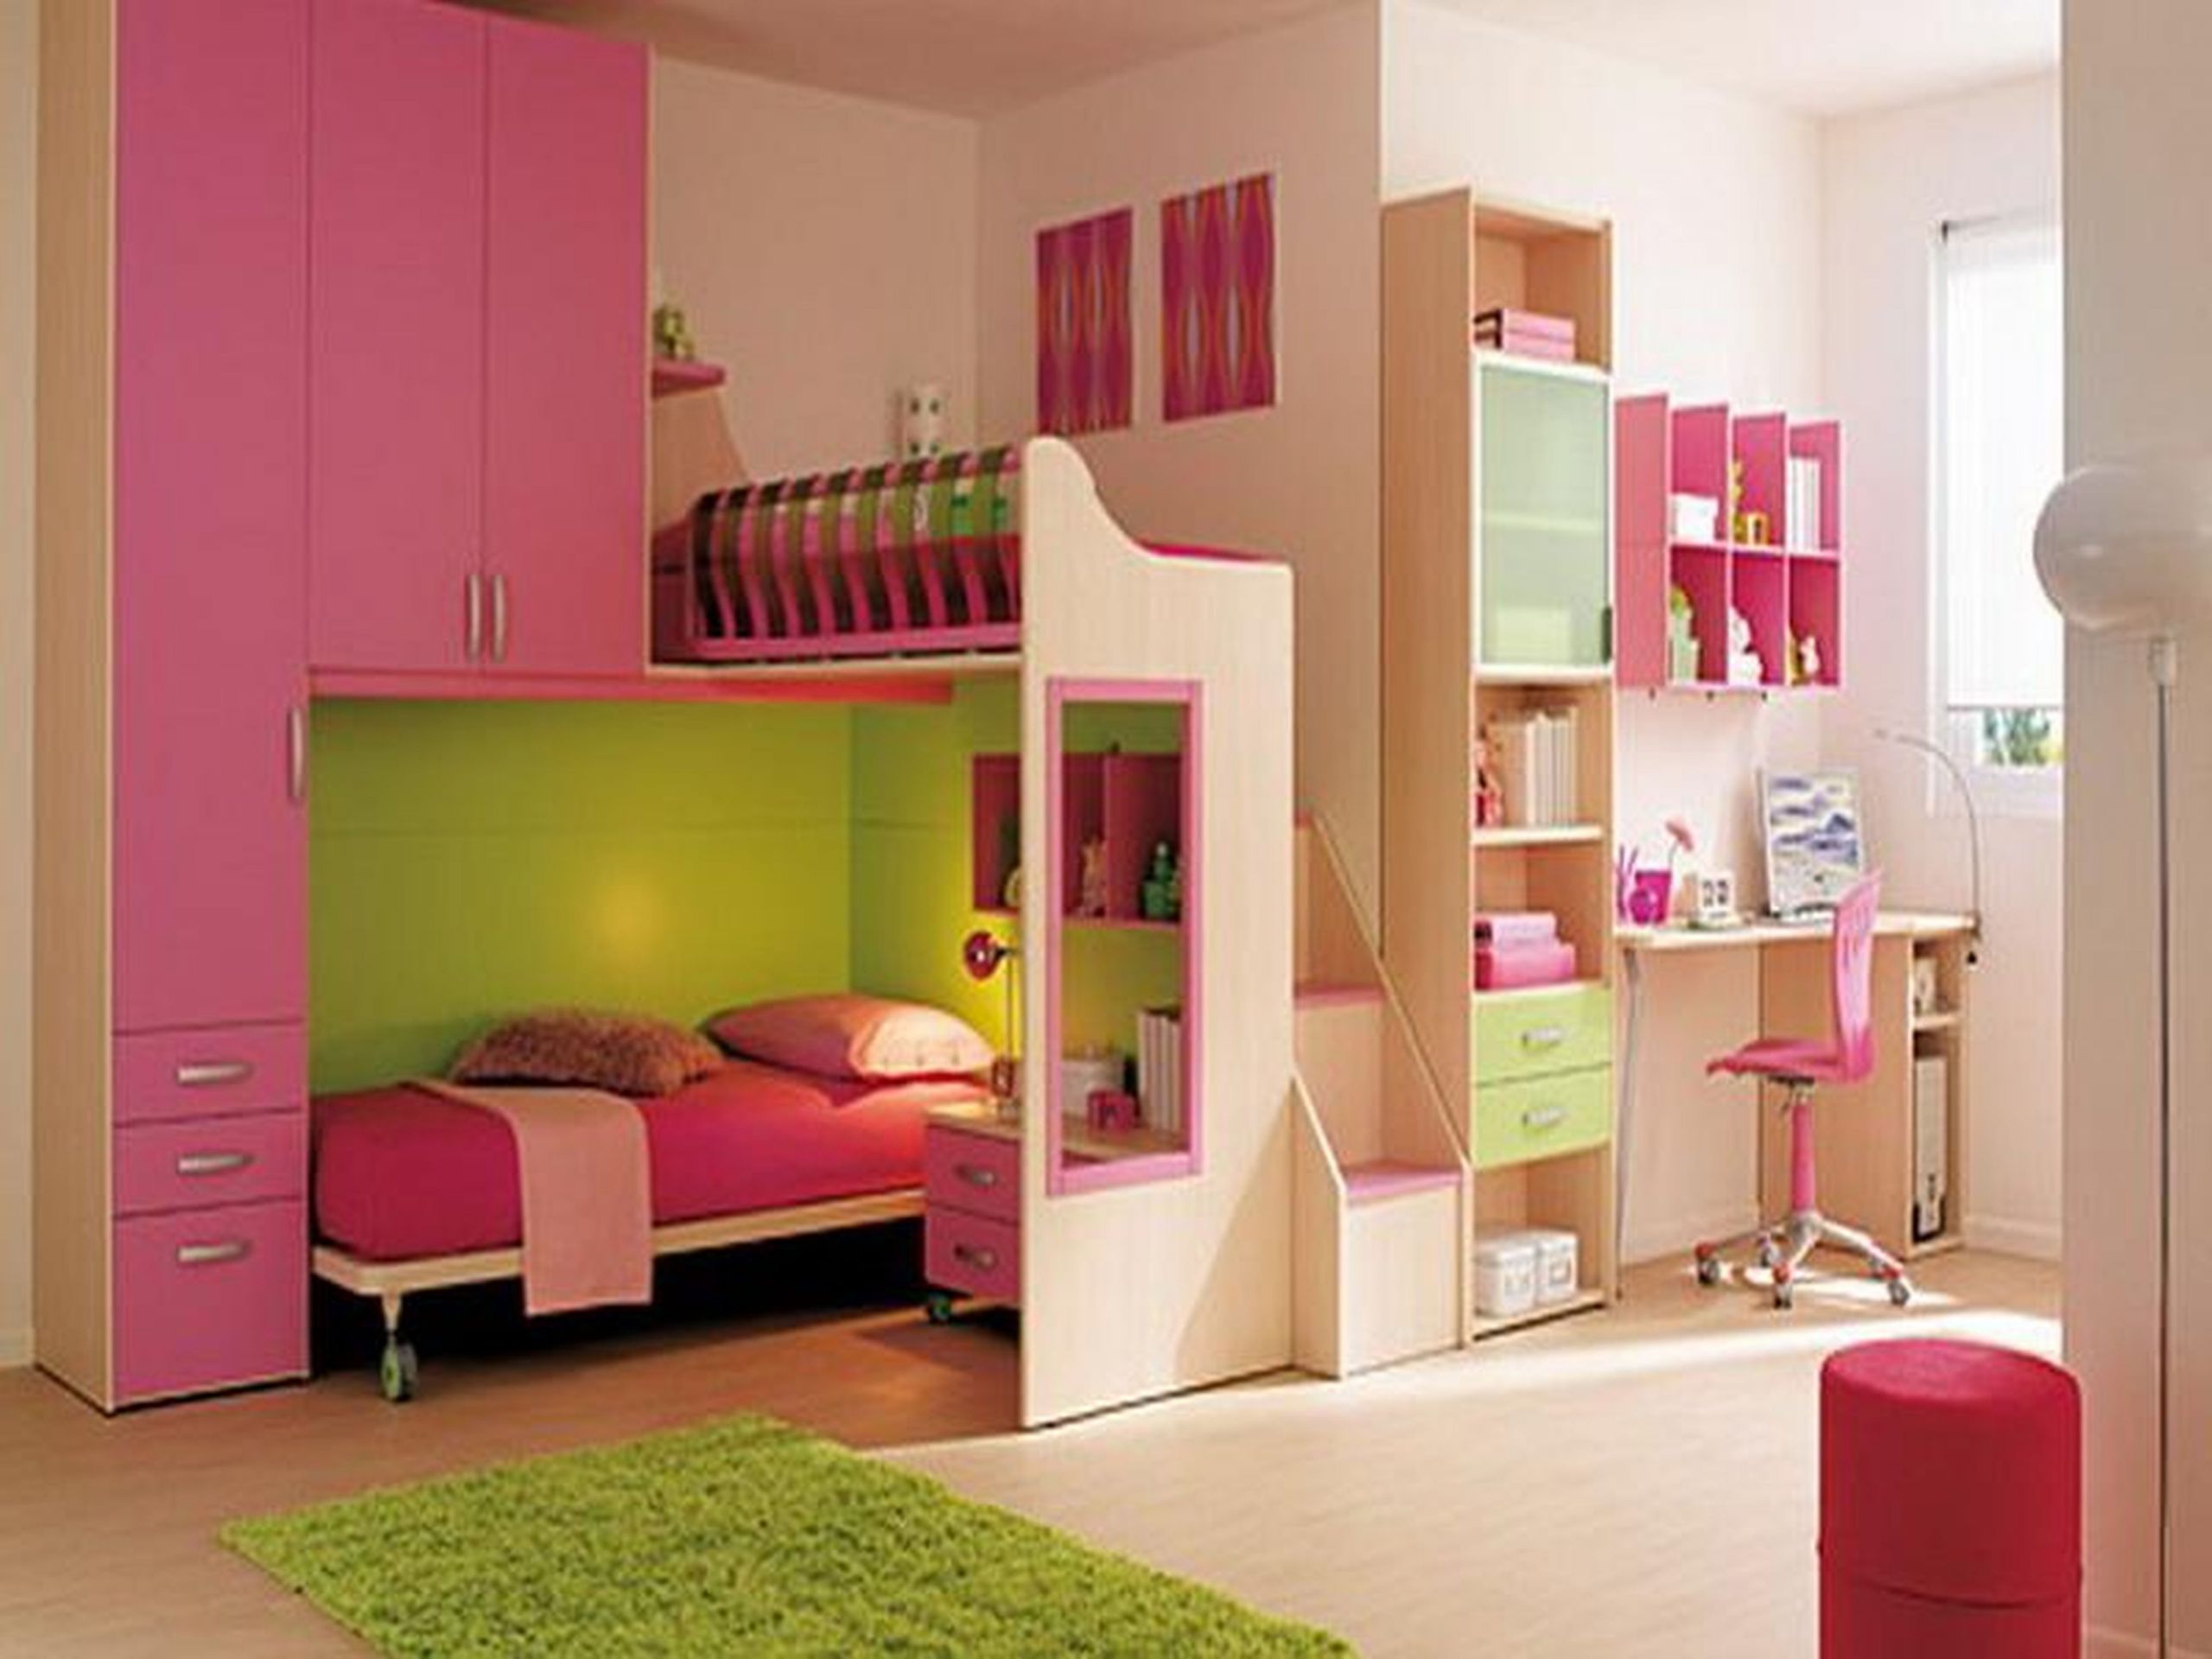 DIY Projects For Kids Rooms
 DIY Storage Ideas For Kids Room Crafts To Do With Kids